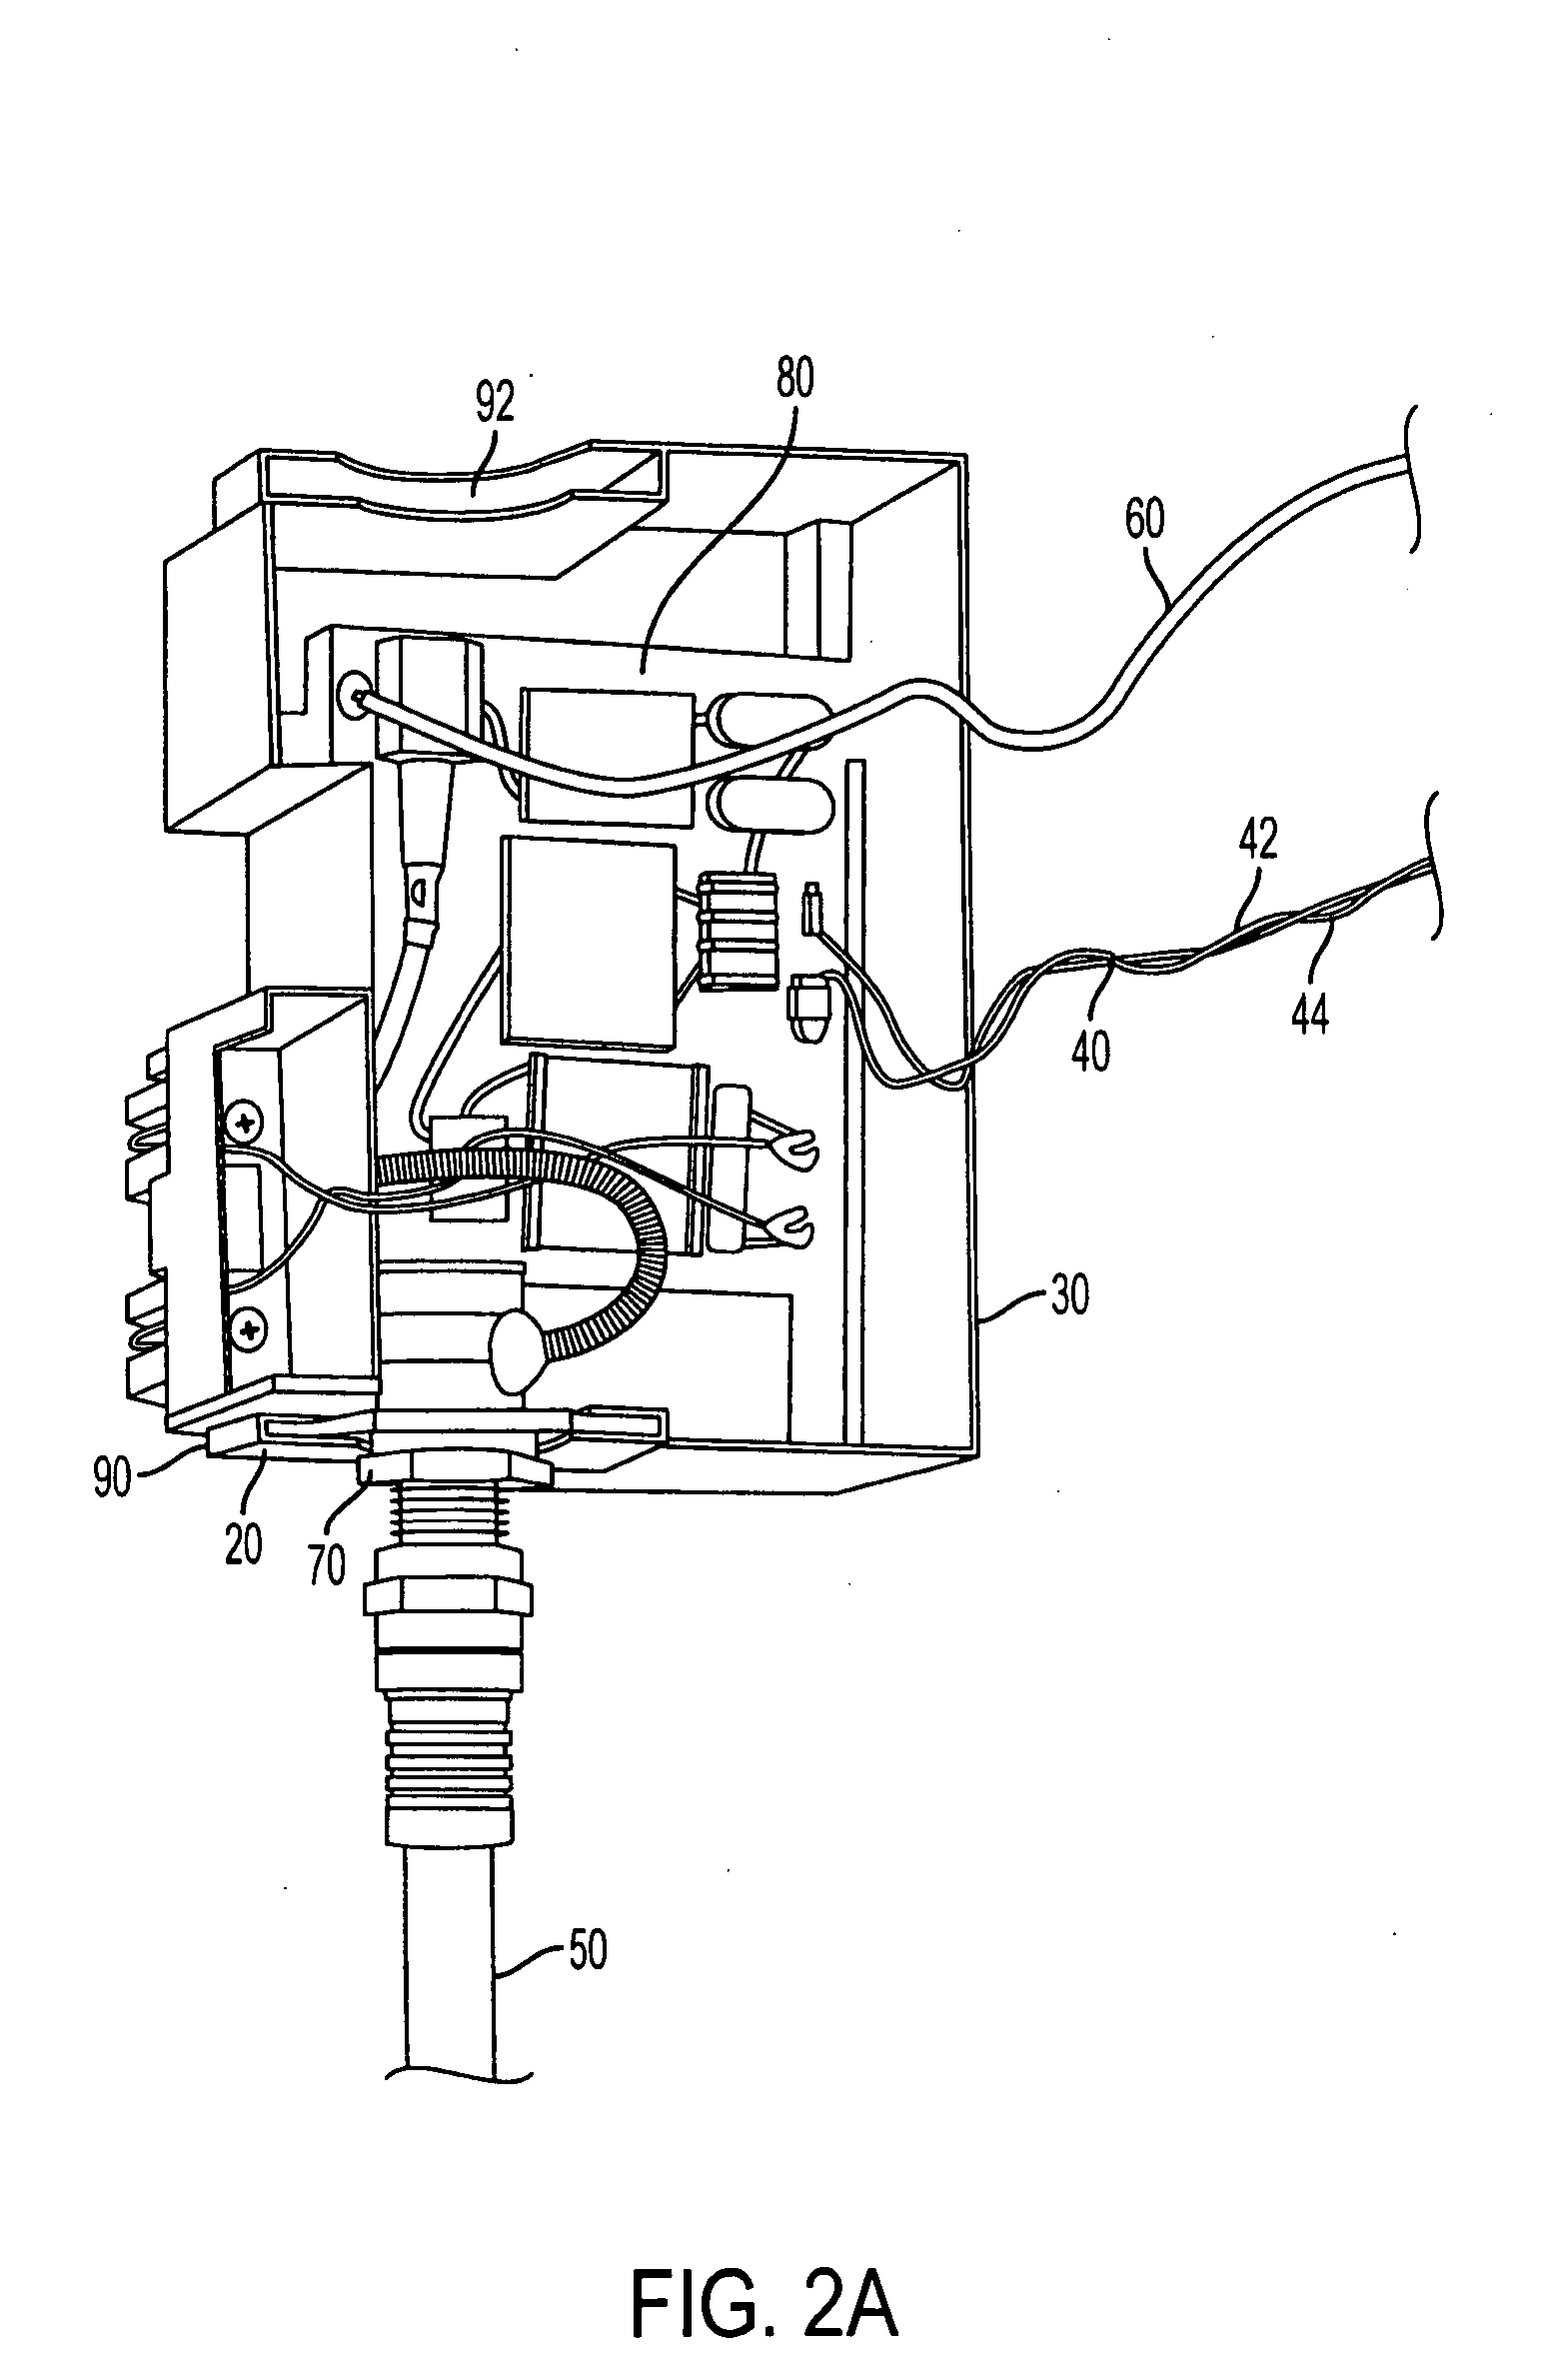 Splitter balun apparatus and method for variable connector directions